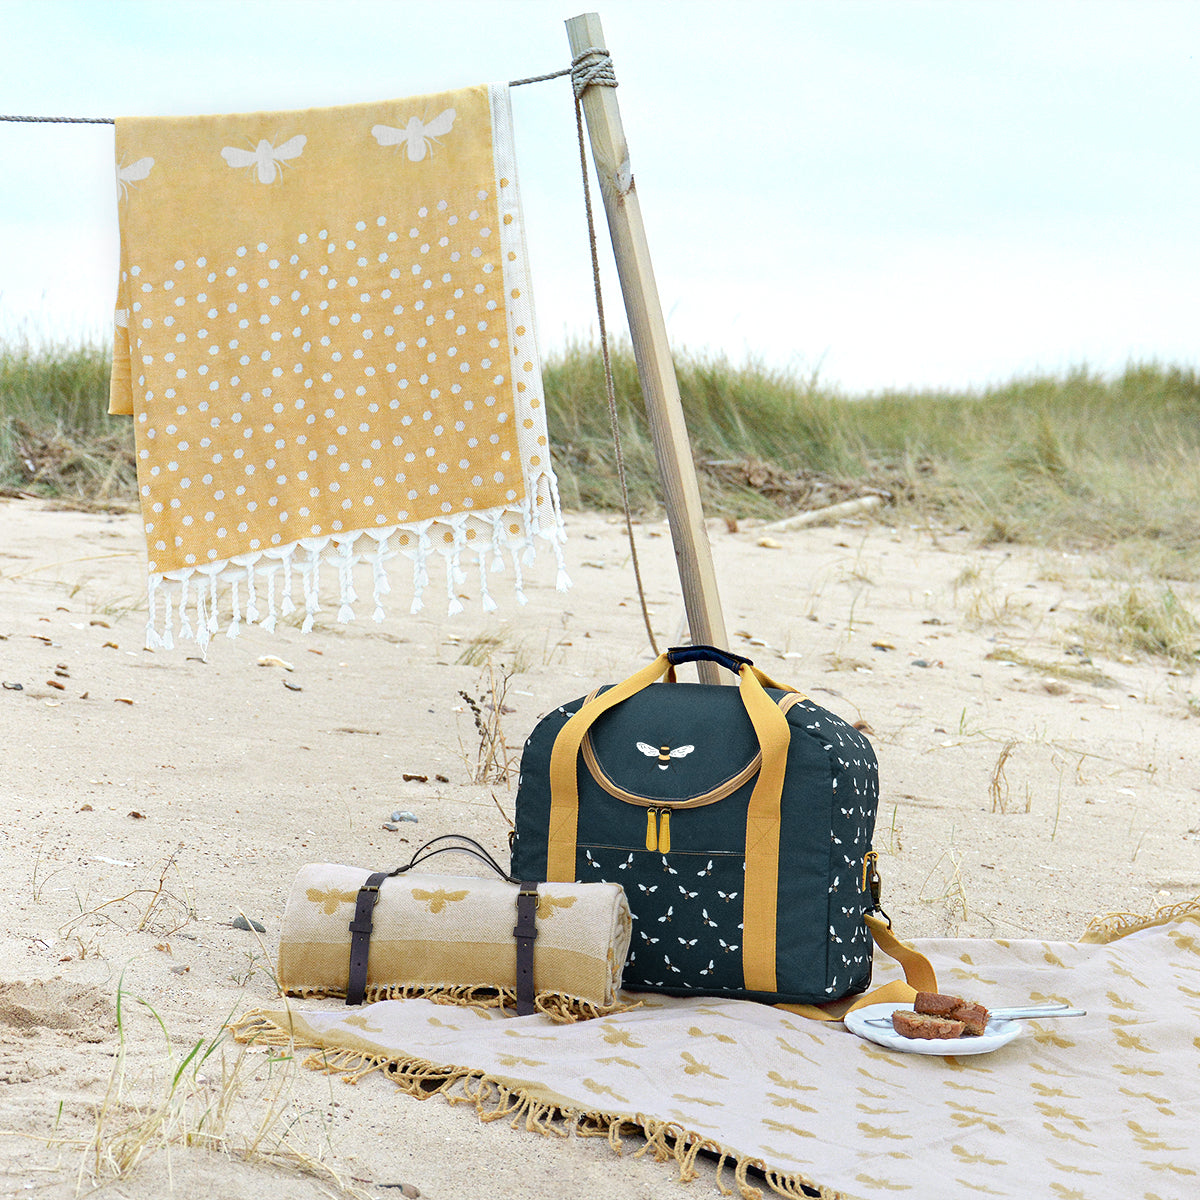 Yellow picnic blanket covered in Sophie Allport's bees picnic collection.